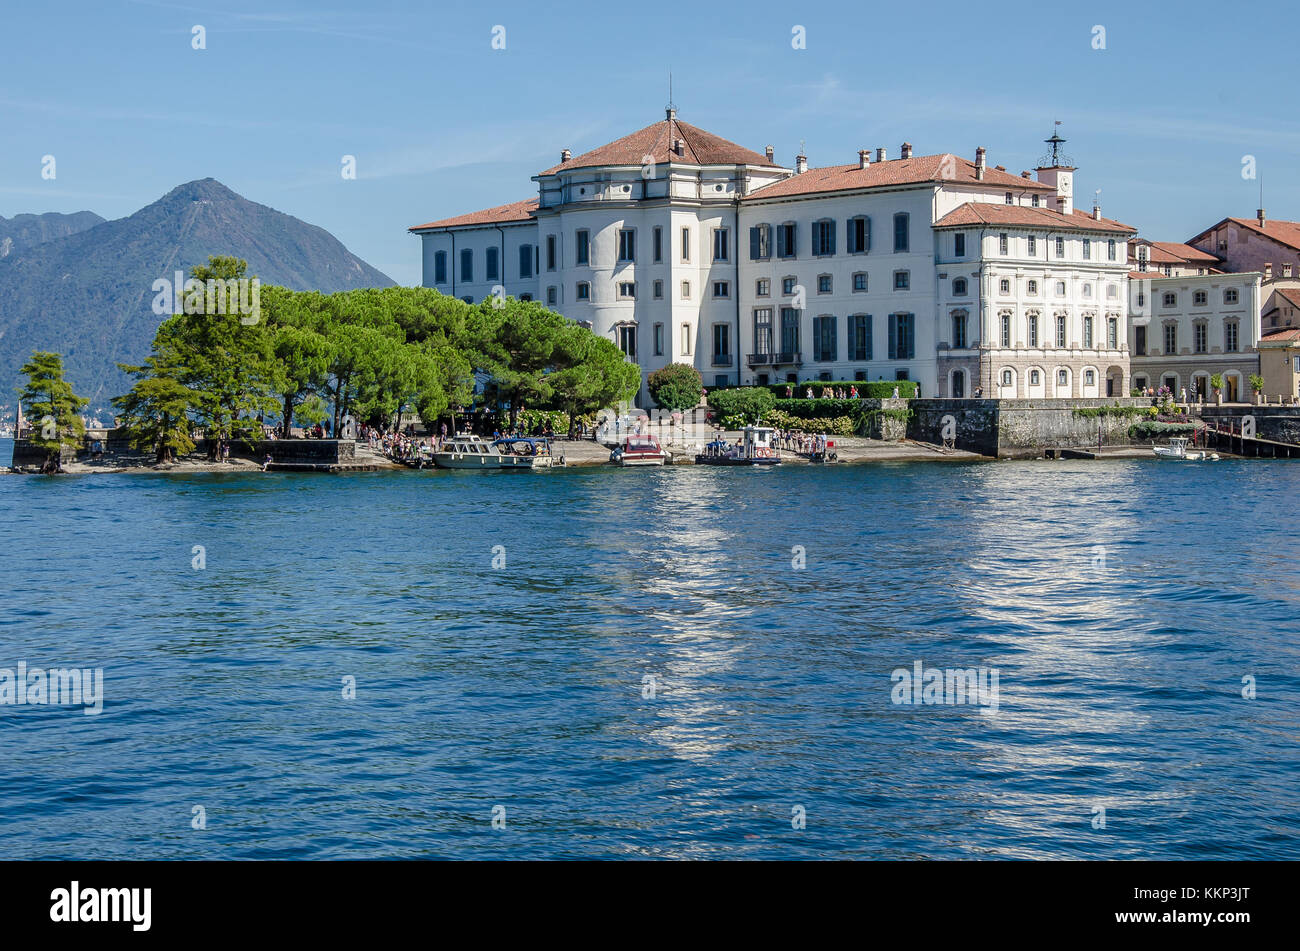 Isola Bella, a natural treasure made even richer by human intervention; it has always been one of the favourite visitor attractions of Lake Maggiore. Stock Photo